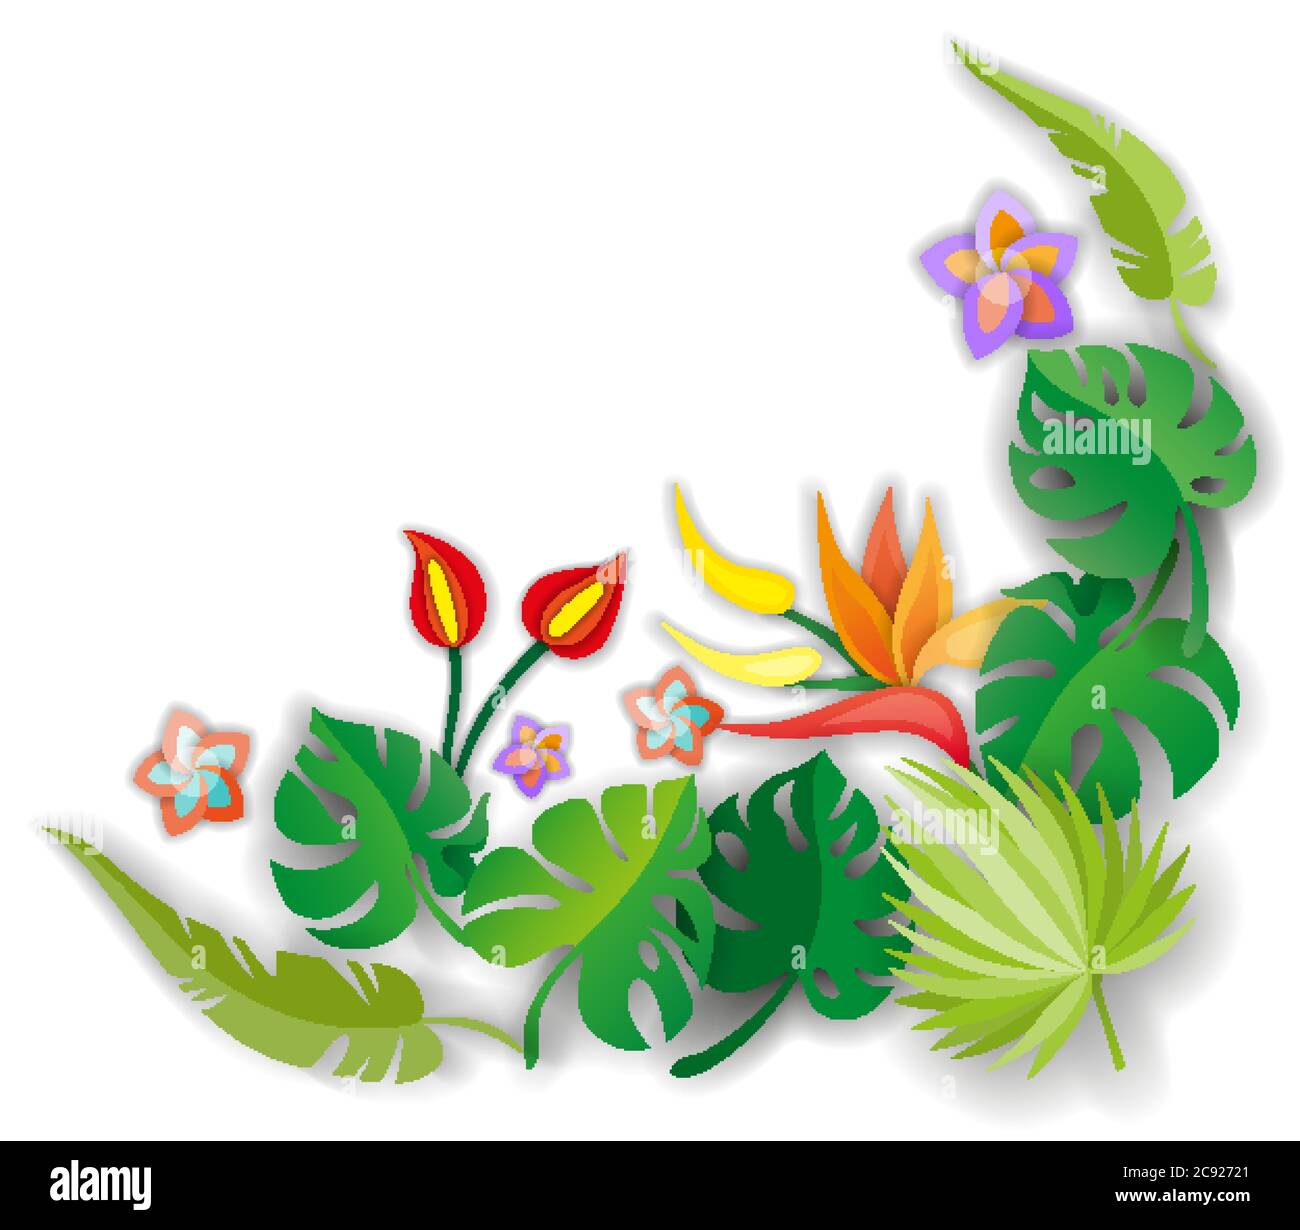 Composition with flowers, leaves and abstract elements. Design for your poster, banner, flyer. Stock Vector